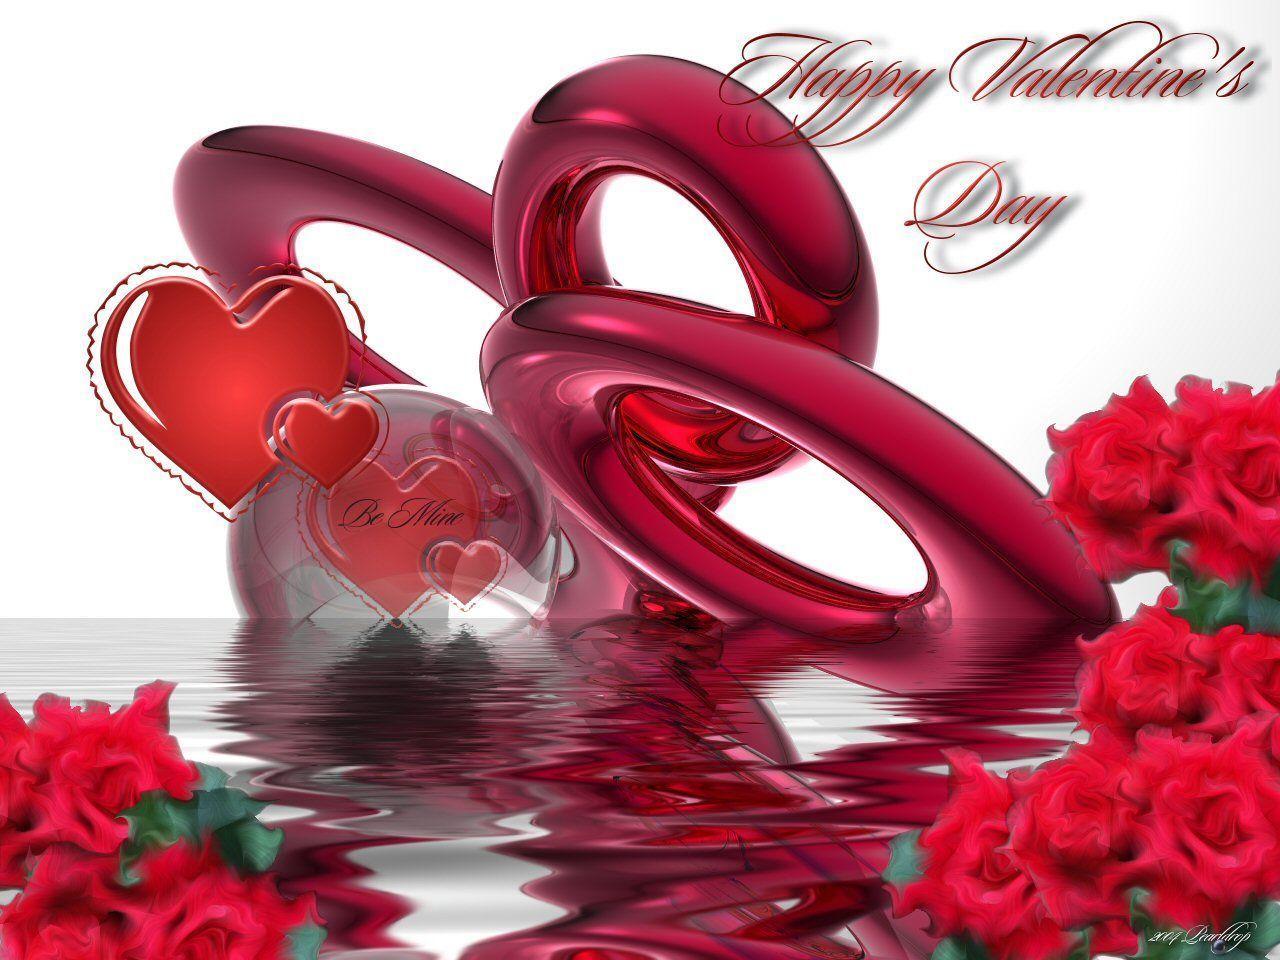 Happy Valentines Day HD Wallpaper, Image, Greetings 2013